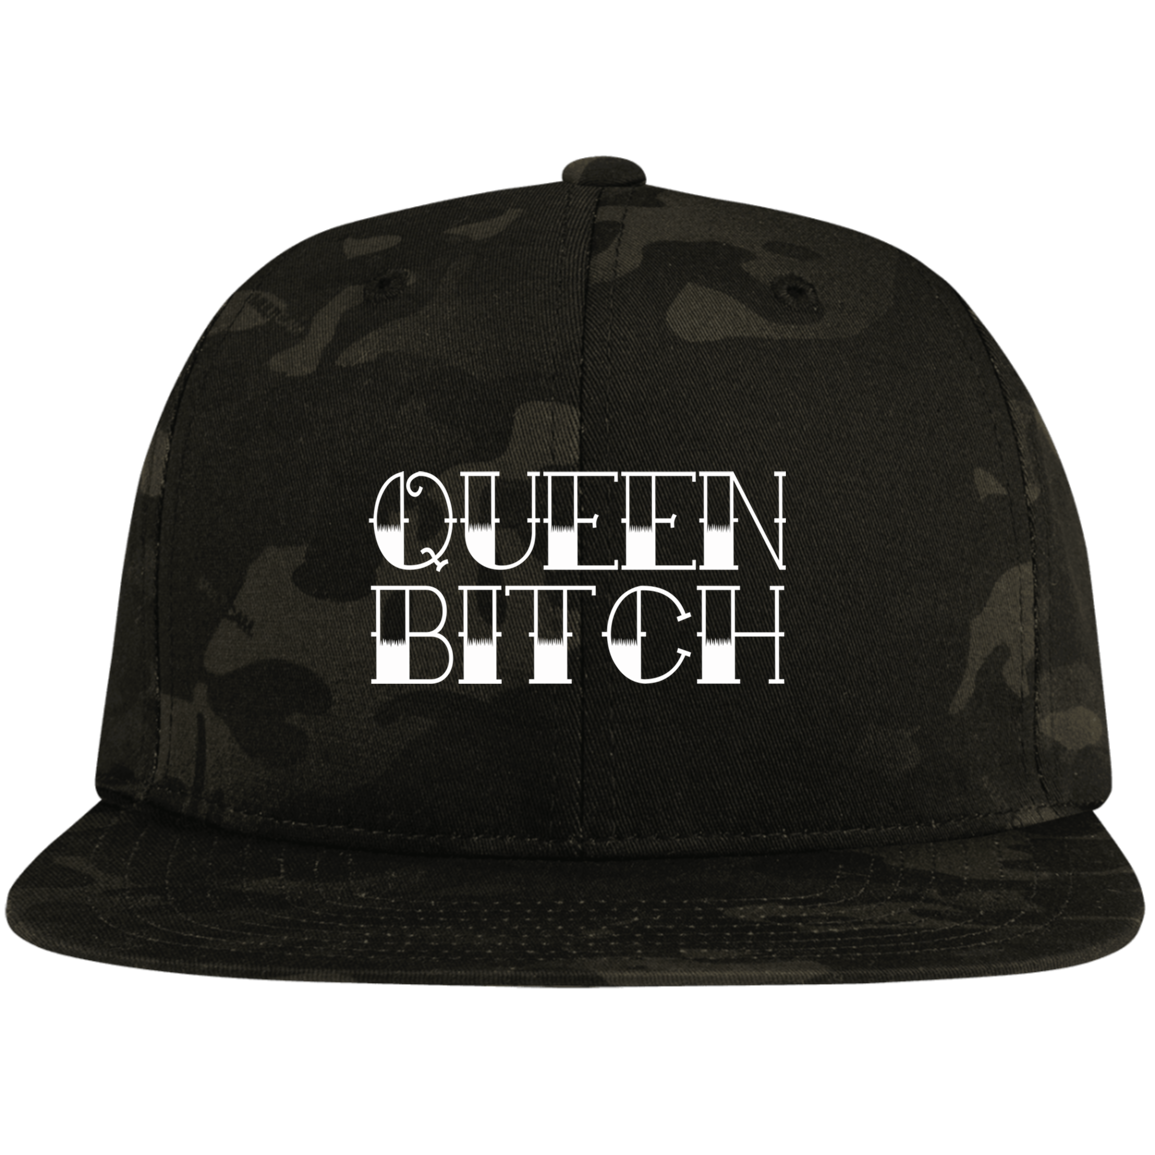 QUEEN BITCH TITLE High-Profile Snapback Hat